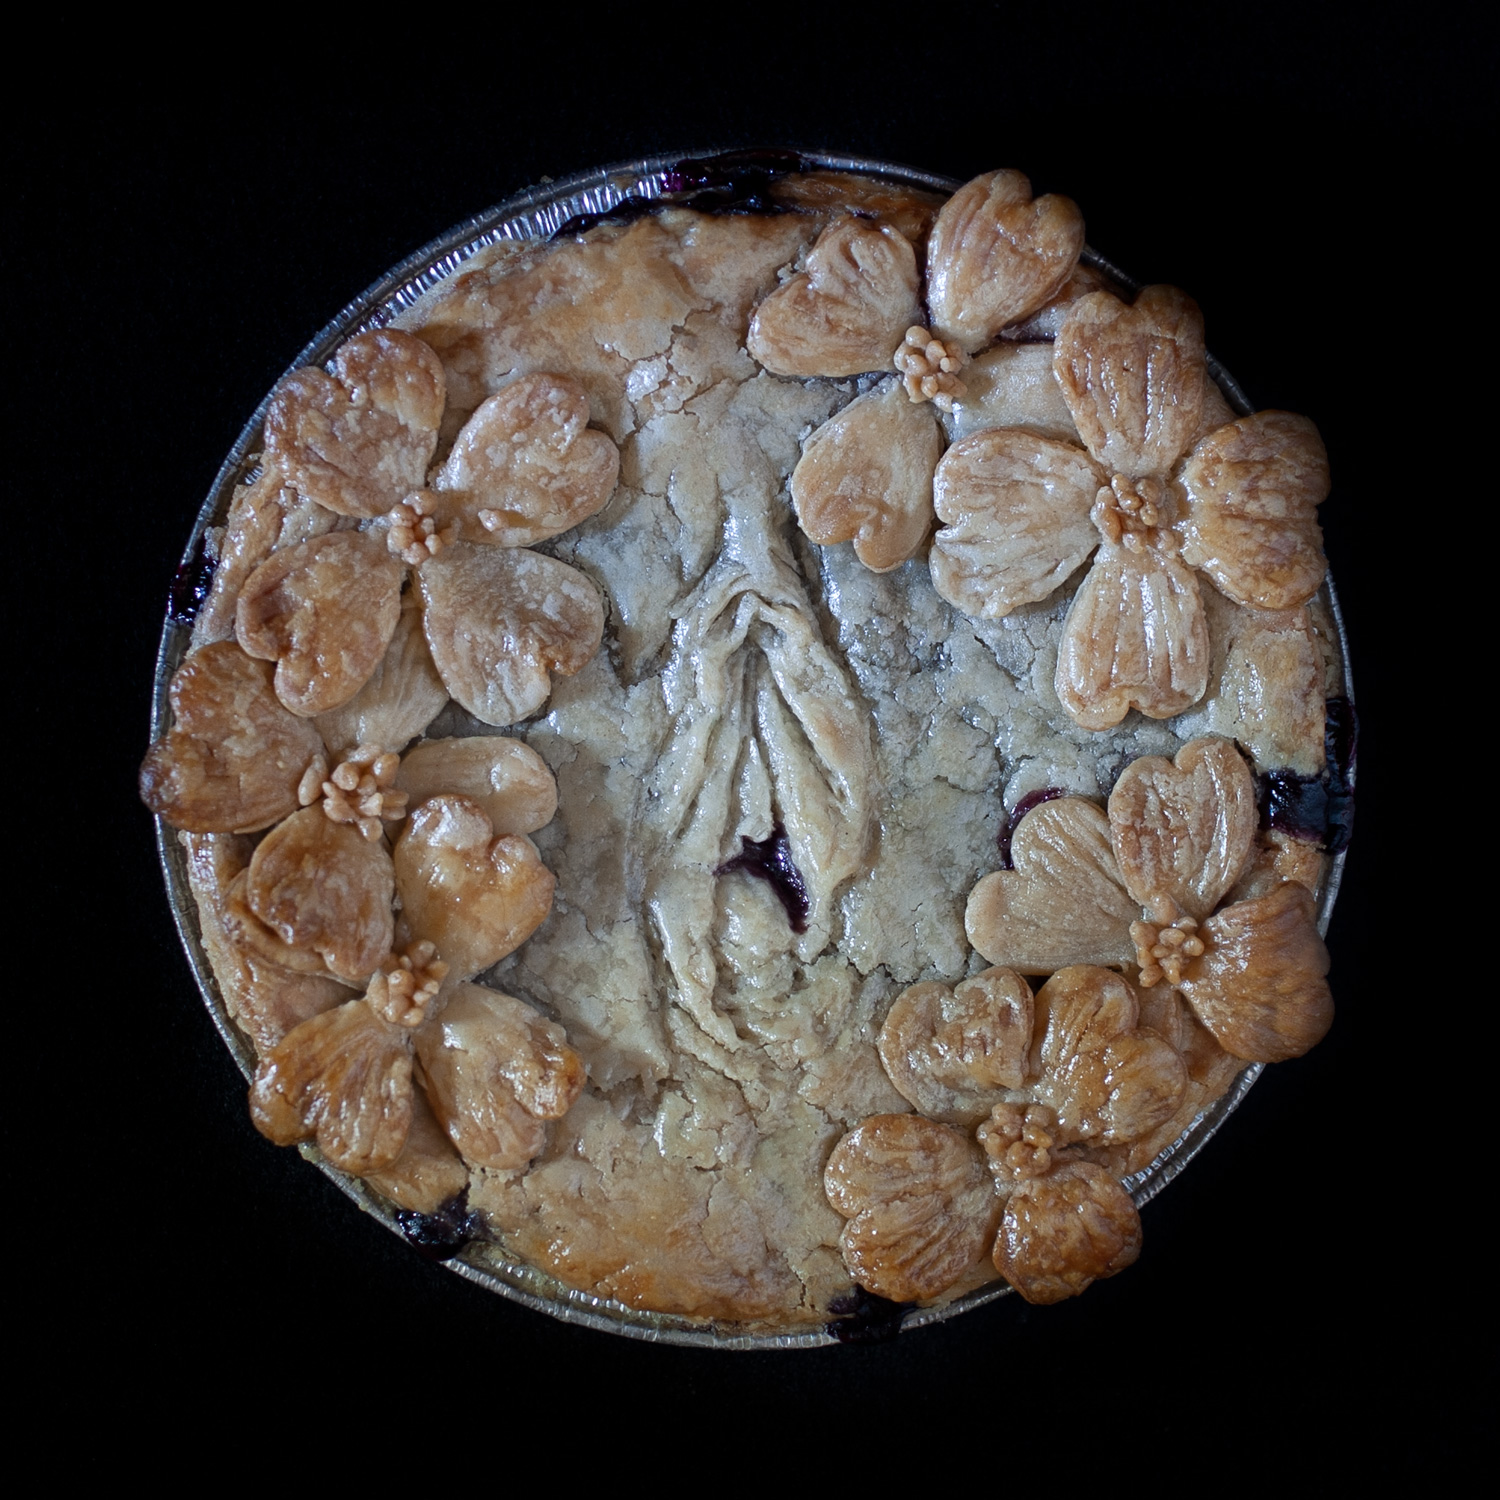 Baked pie on a black background. In the center of the pie is a hand sculpted pie crust vulva surrounded by dogwood flowers made of pie dough.